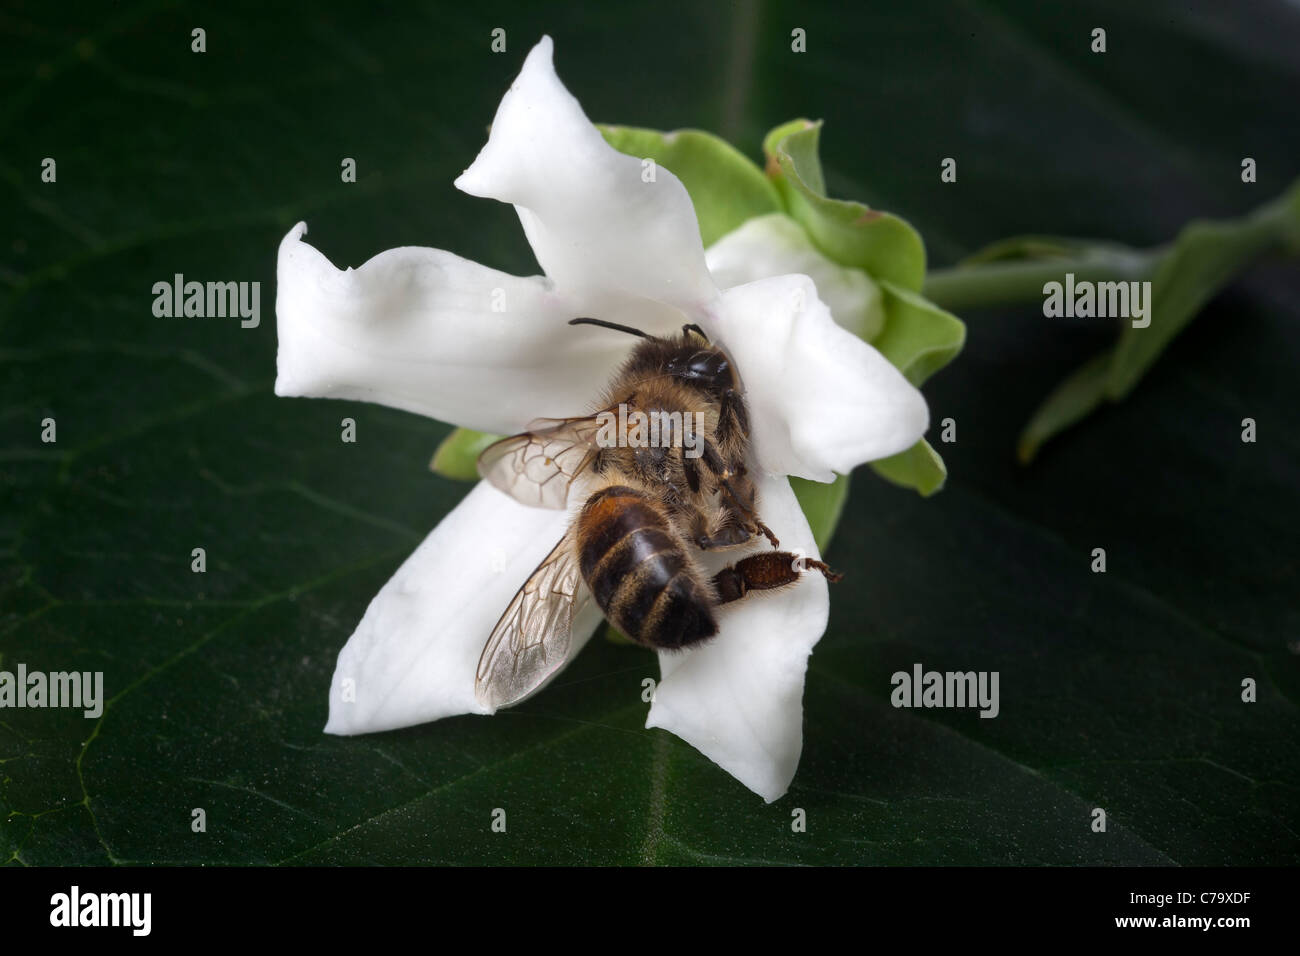 A bee dead from exhaustion after being trapped by a Cruel Vine (Araujia sericifera) flower. Stock Photo